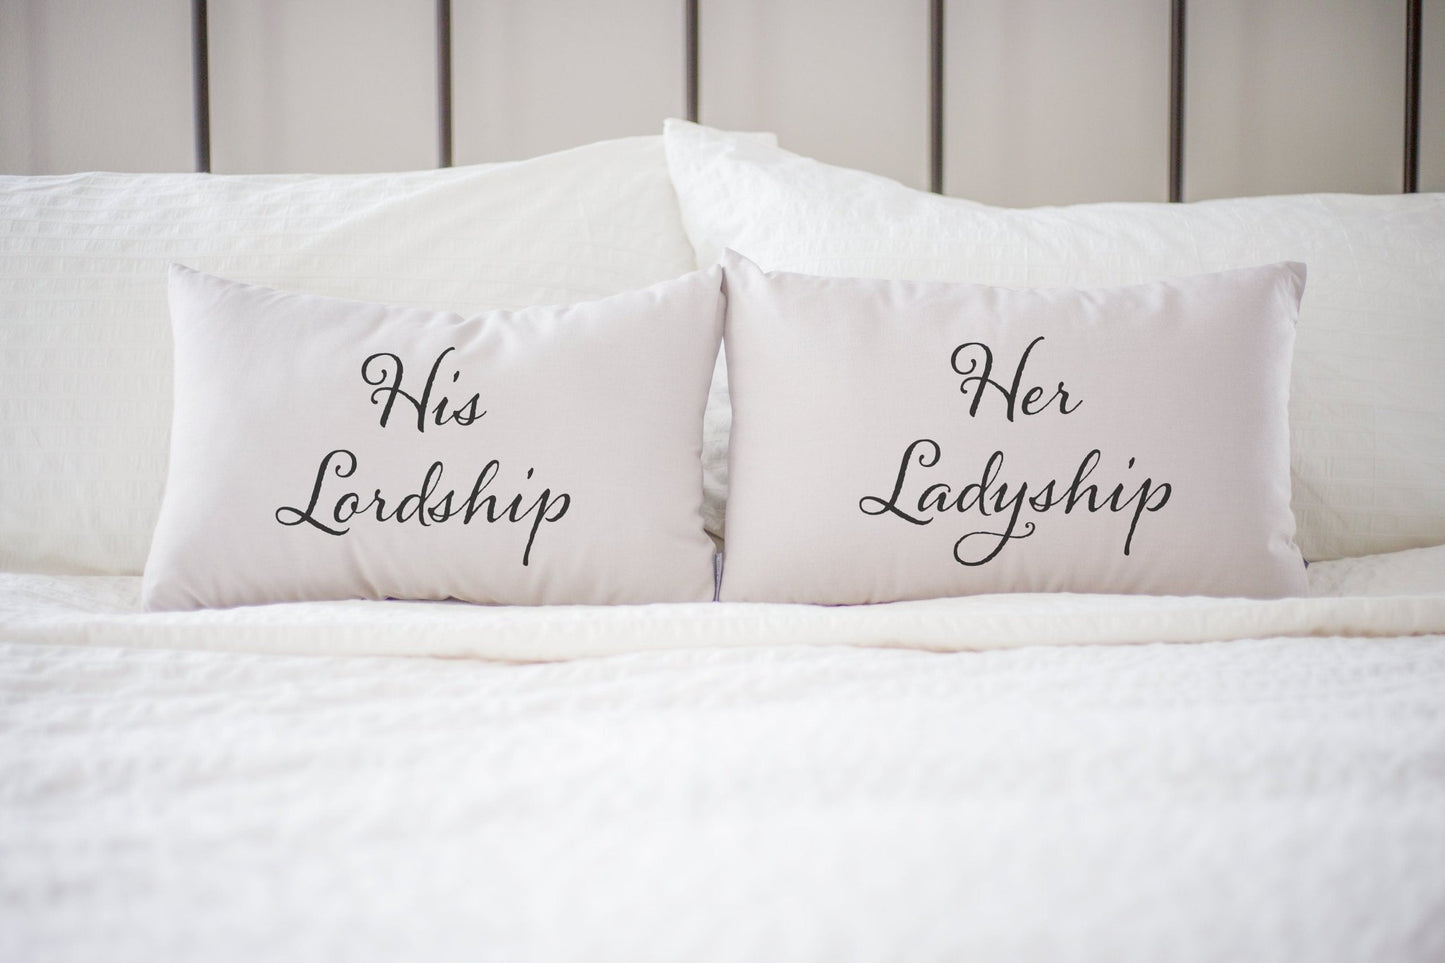 Load image into Gallery viewer, Humor Pillow Set Party Gift | Humor Gift for Spouse Gift Wedding Gift Funny | Valentine Gift for Husband | Unique Gift For Couple Bedding
